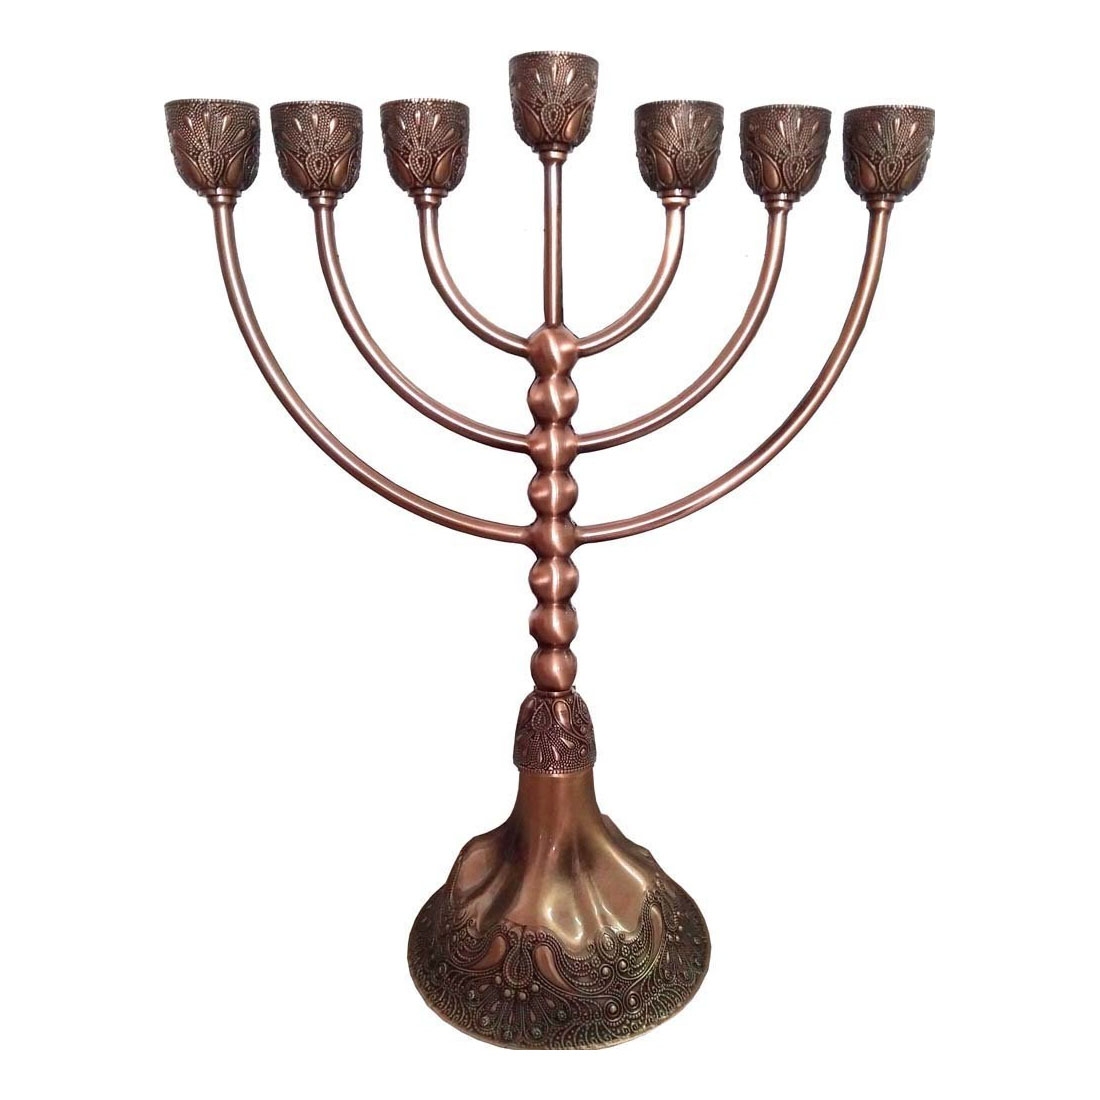 Copper-Plated Traditional Ornate 7-Branched Menorah - Medium   - 1